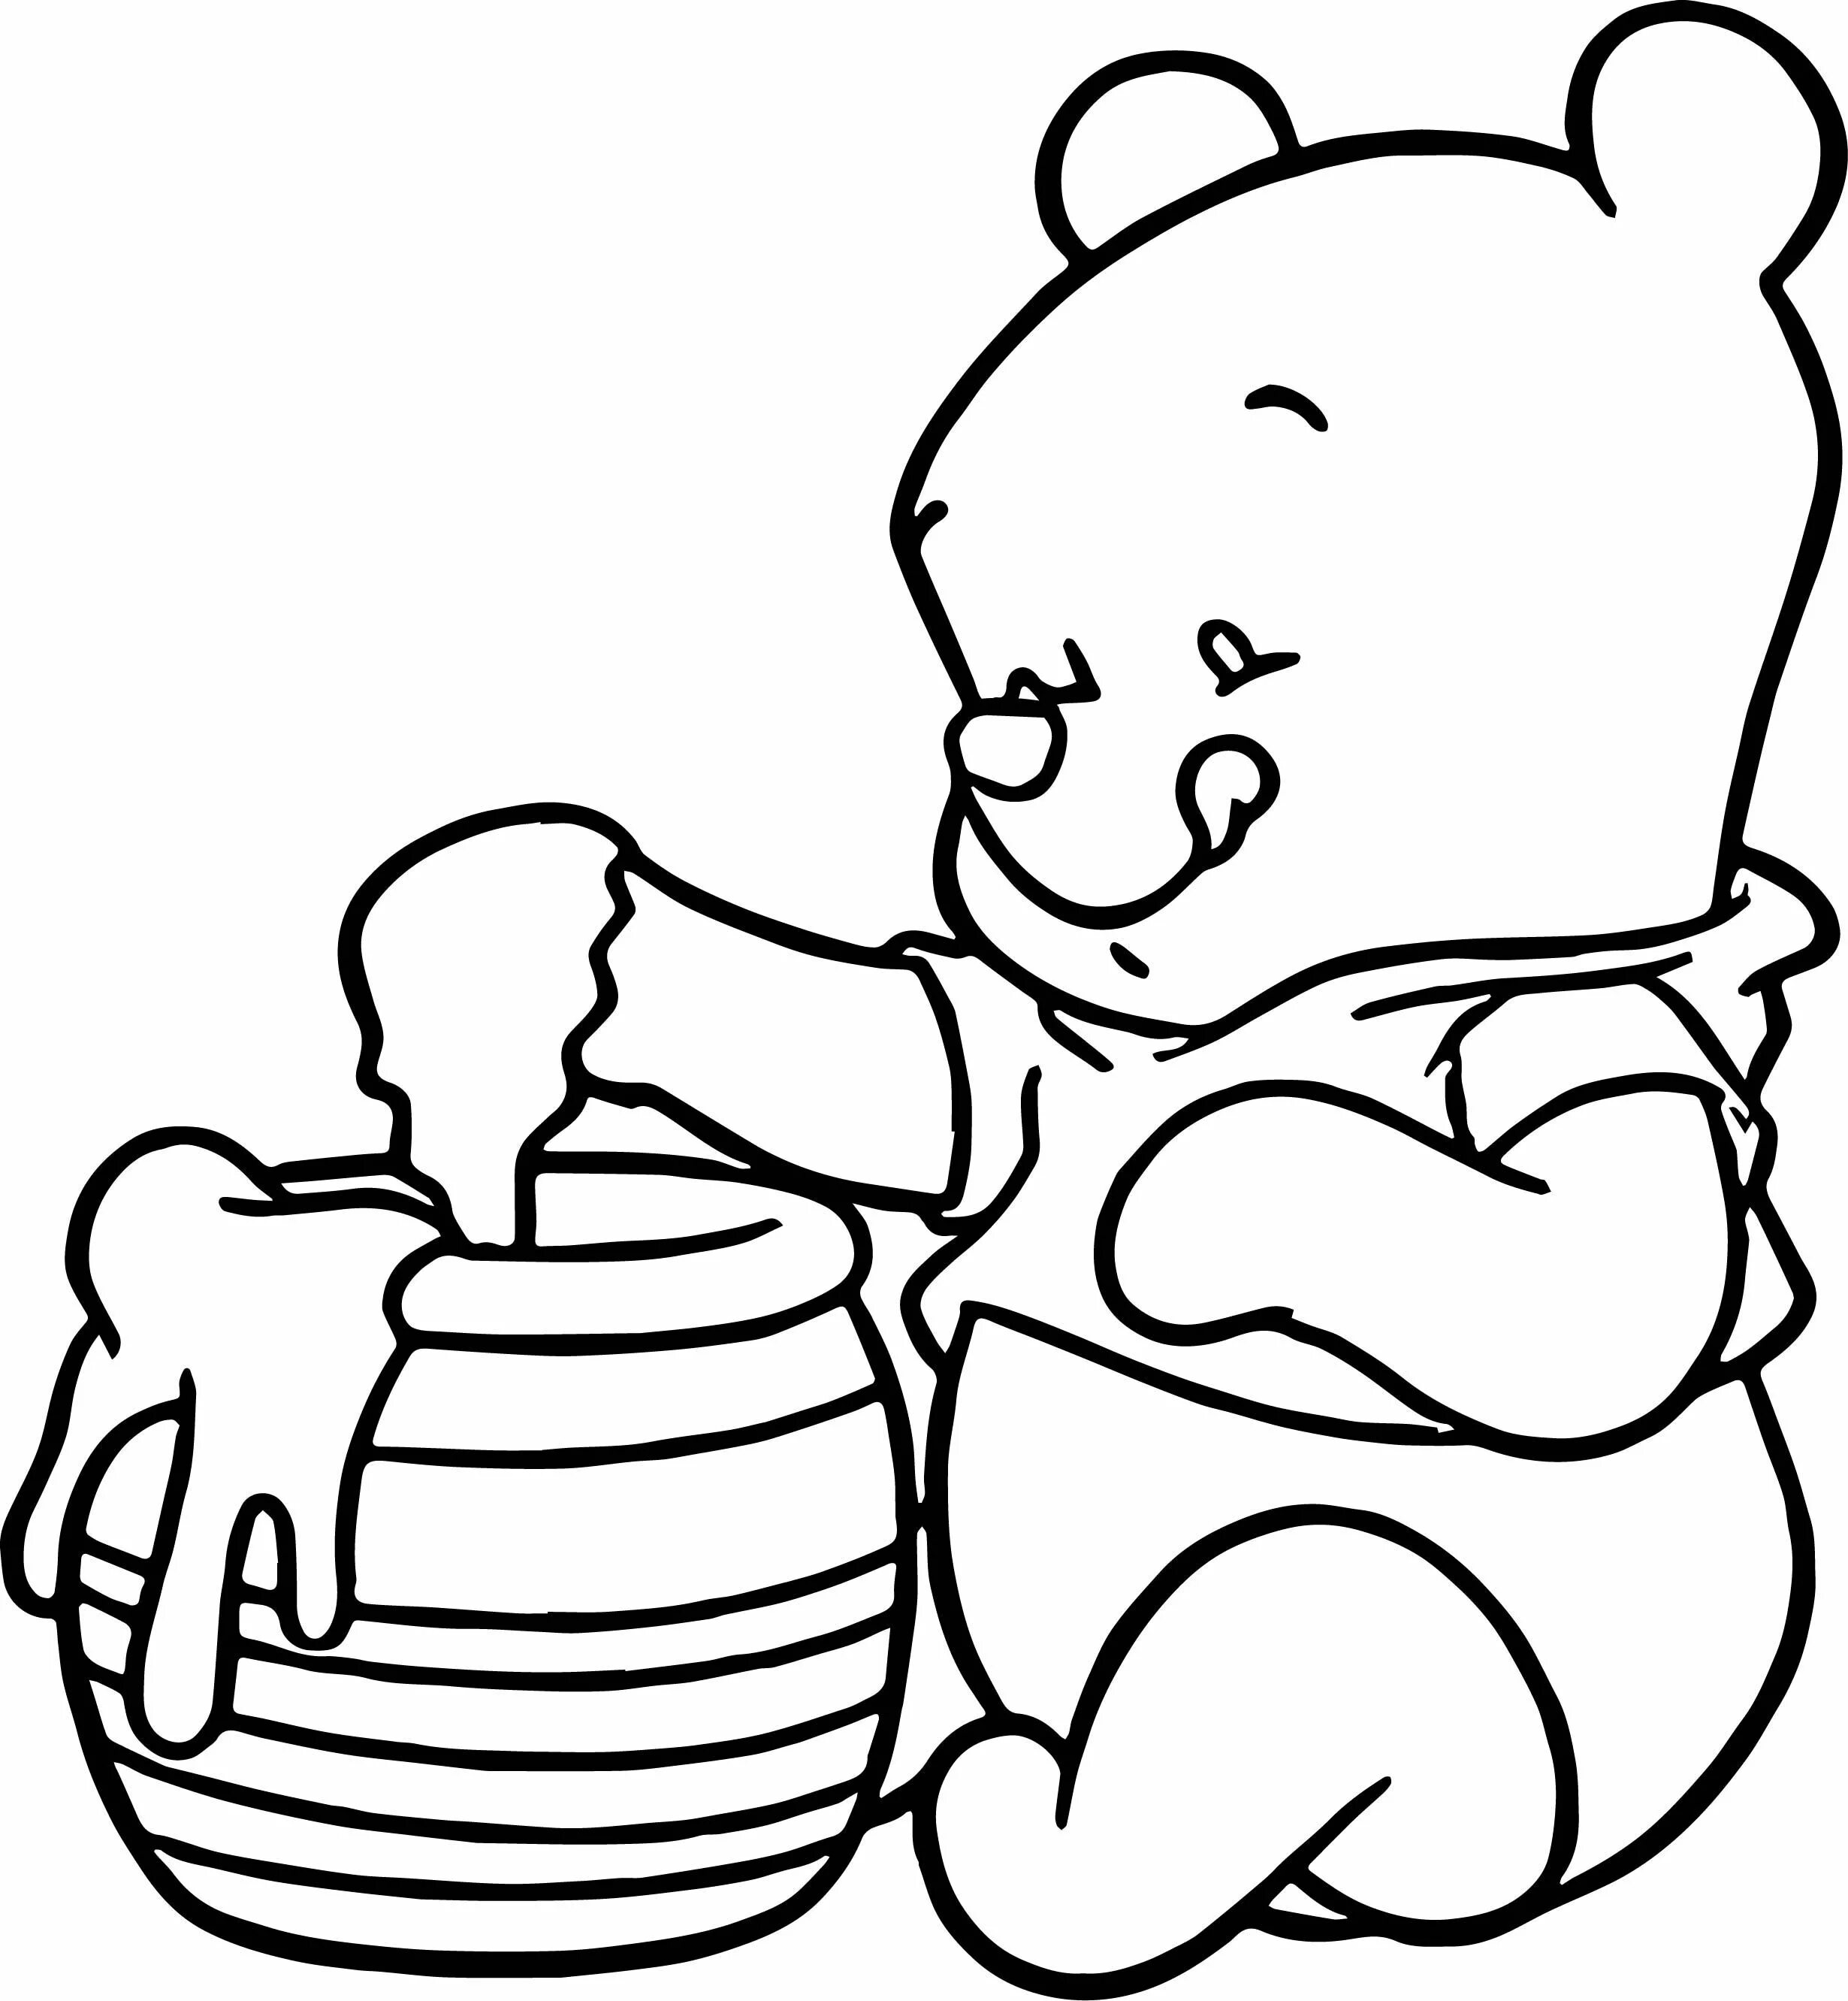 Coloring showy bear with honey